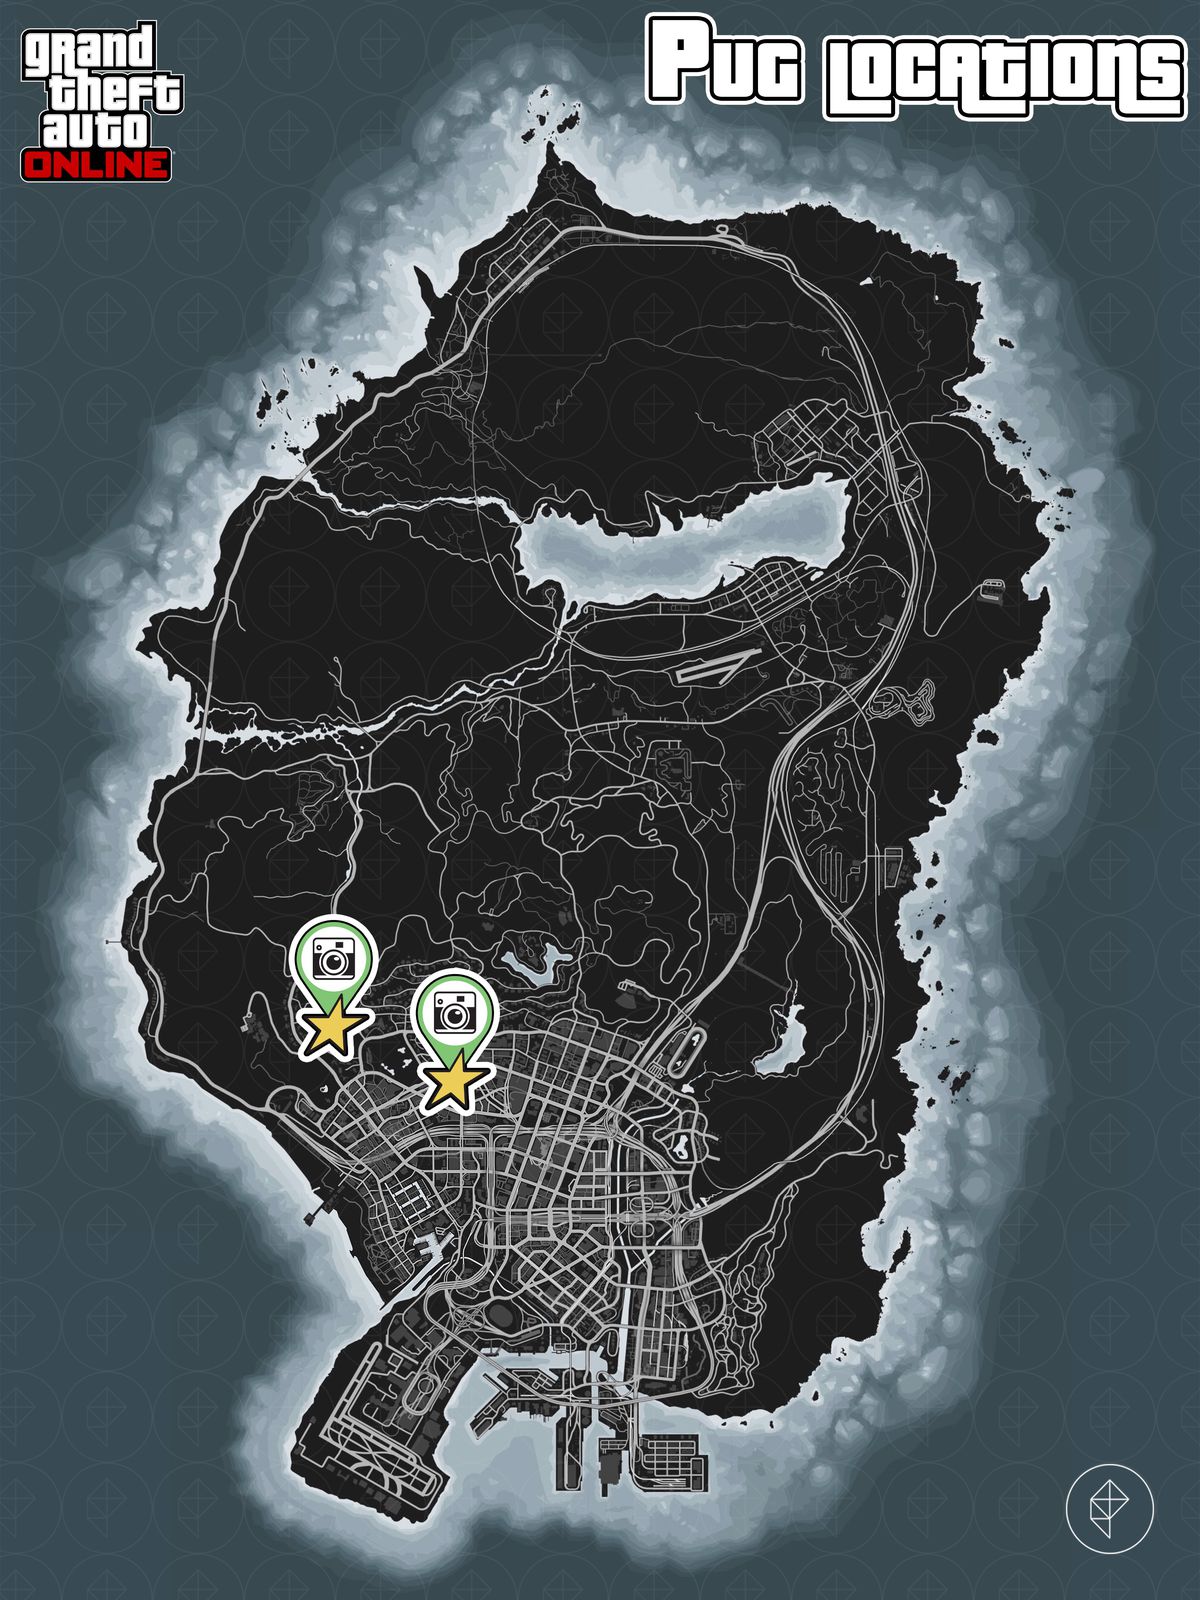 GTA Online map showing pug locations